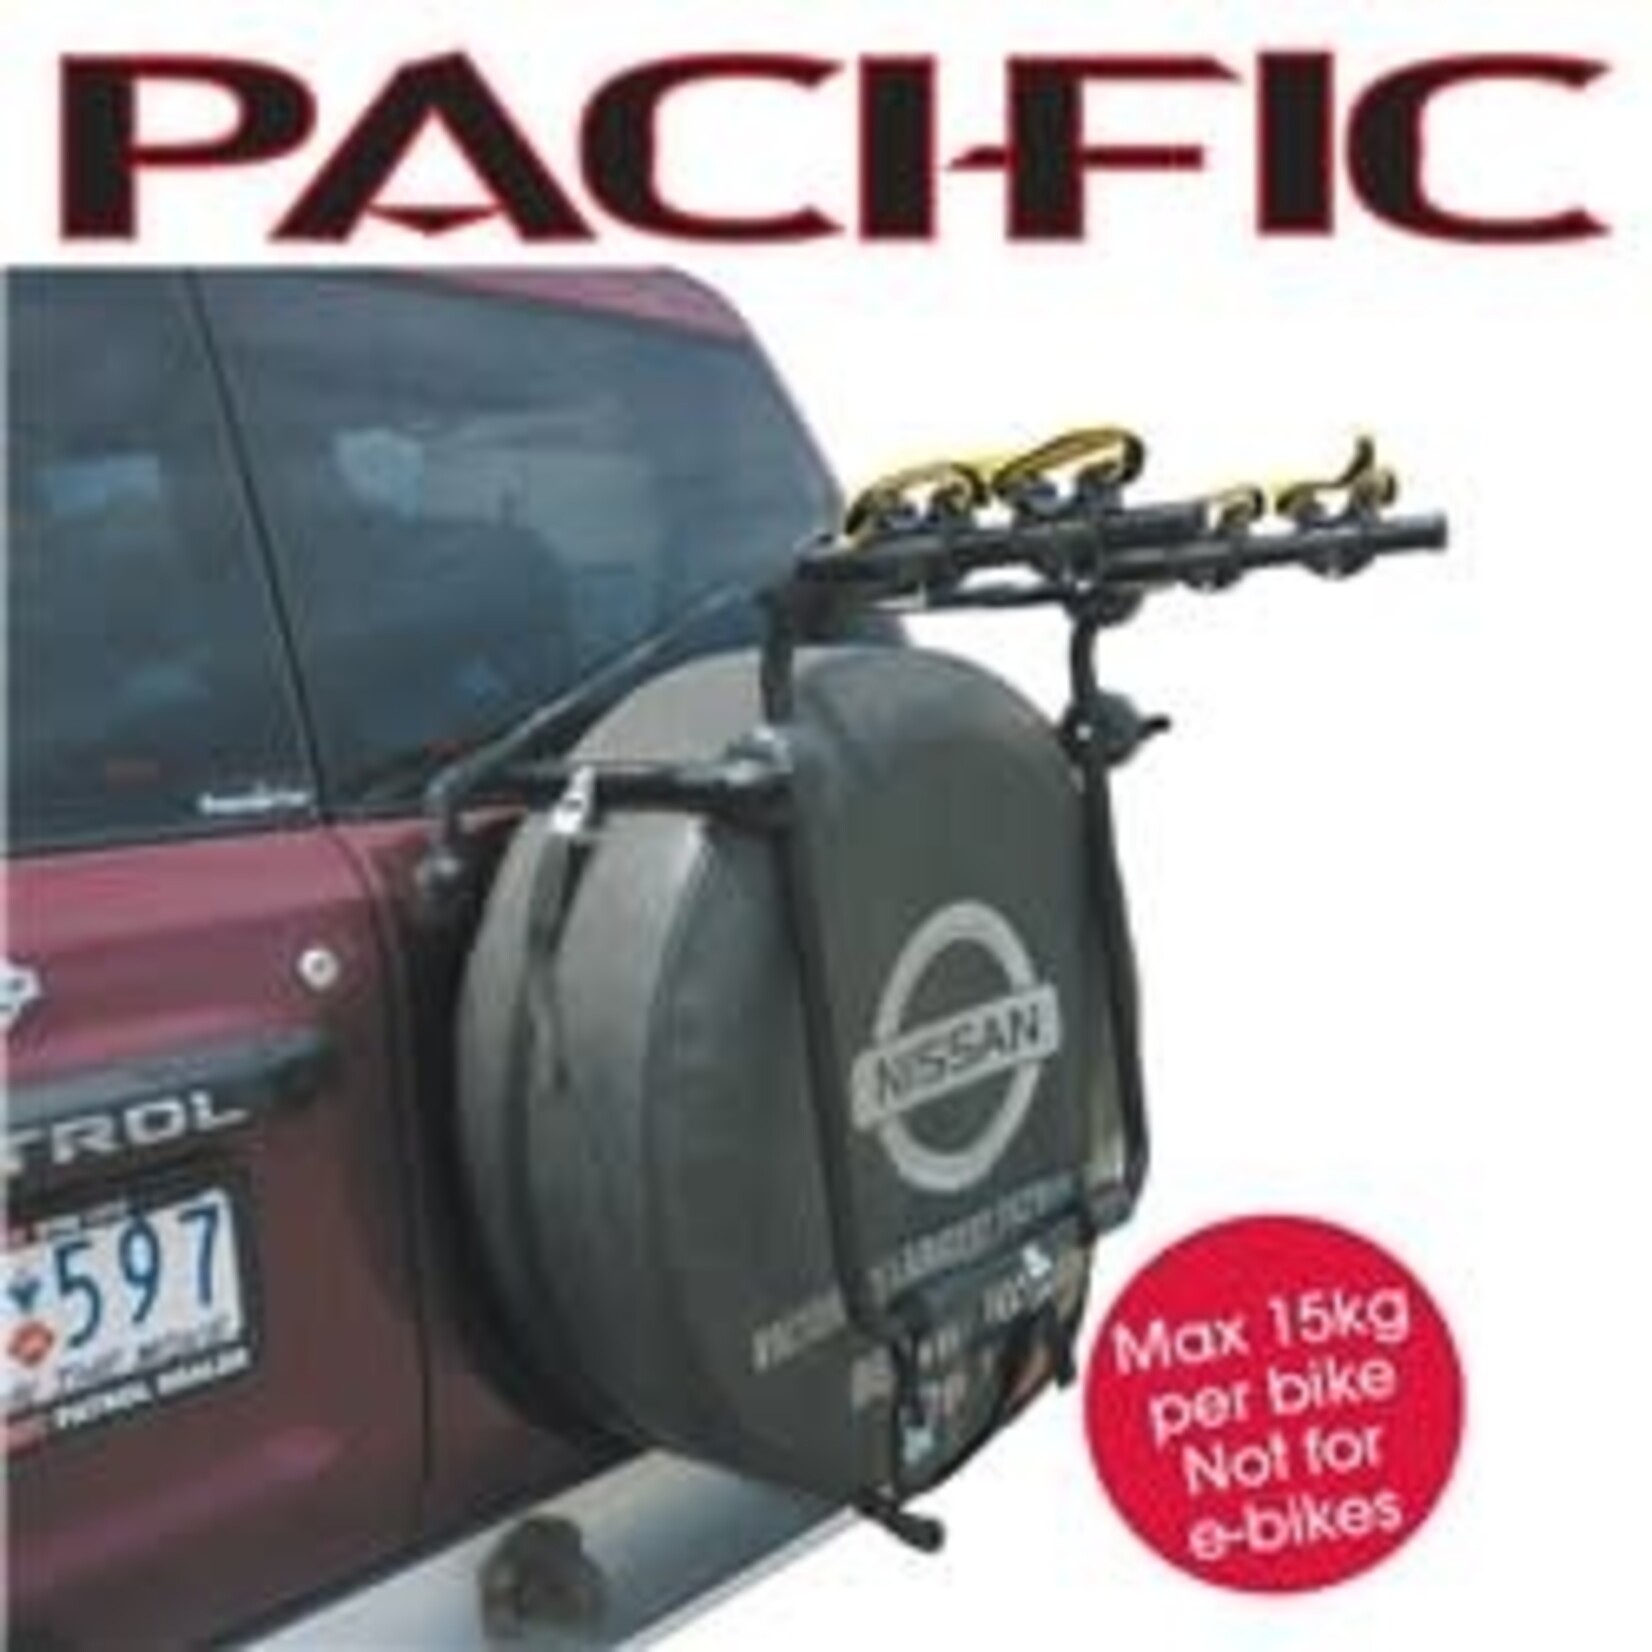 Pacific PACIFIC Bike Carriers